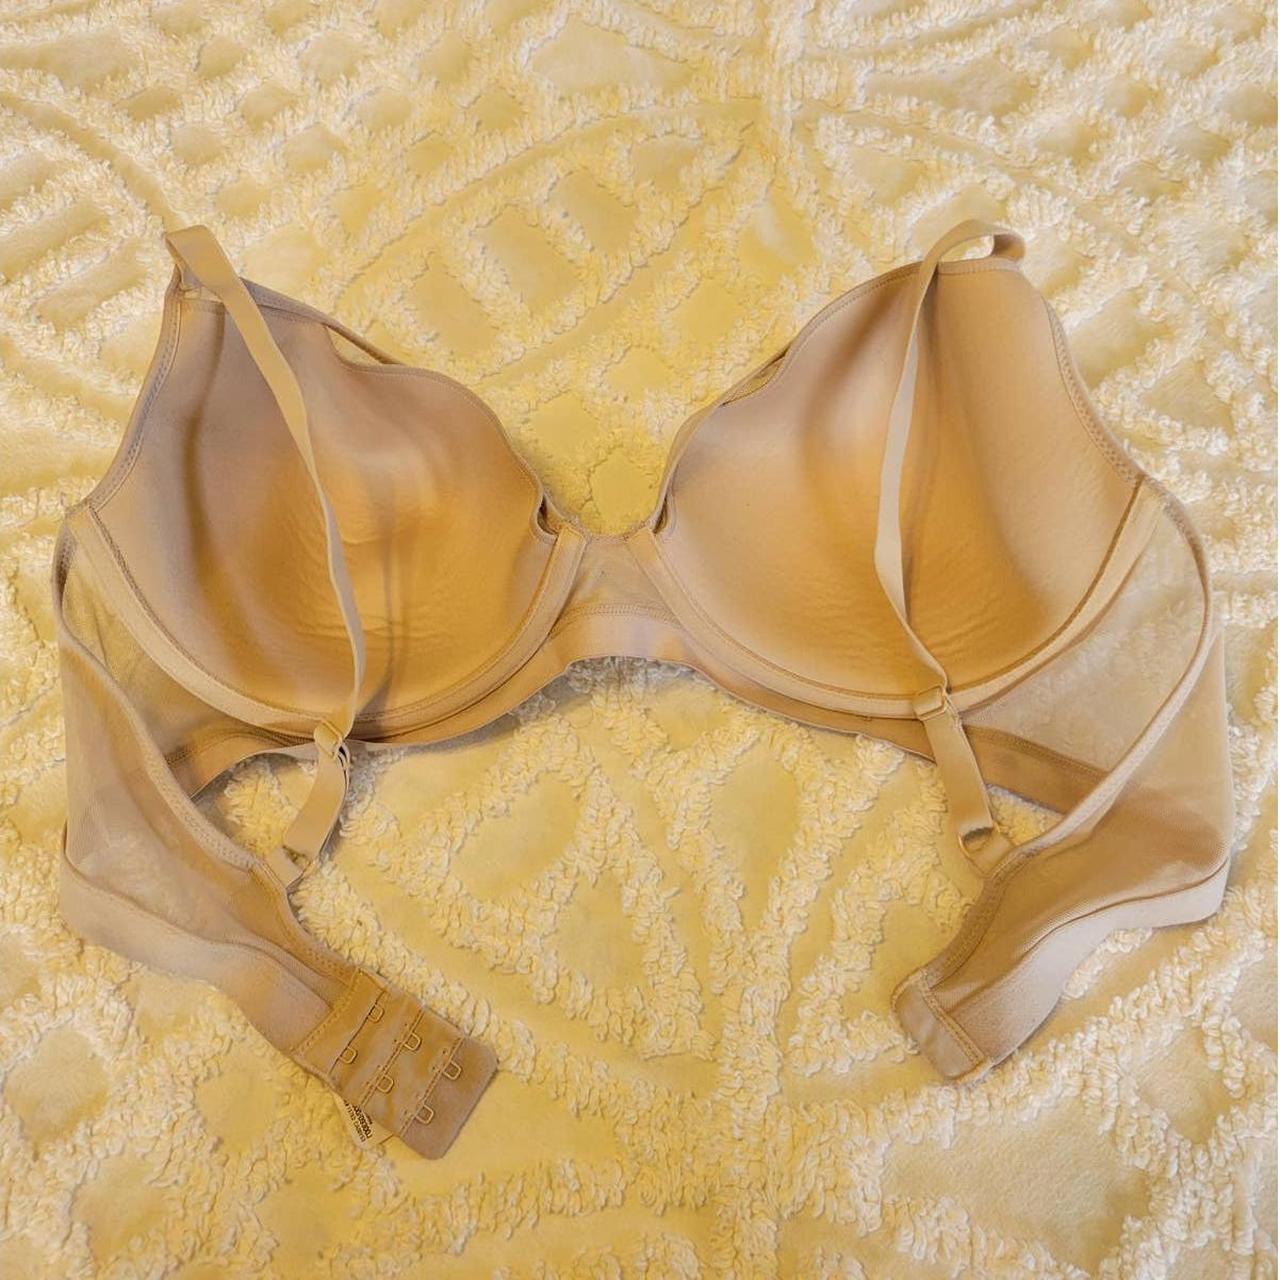 Maidenform Lace Padded Underwire Full coverage Bra - Depop